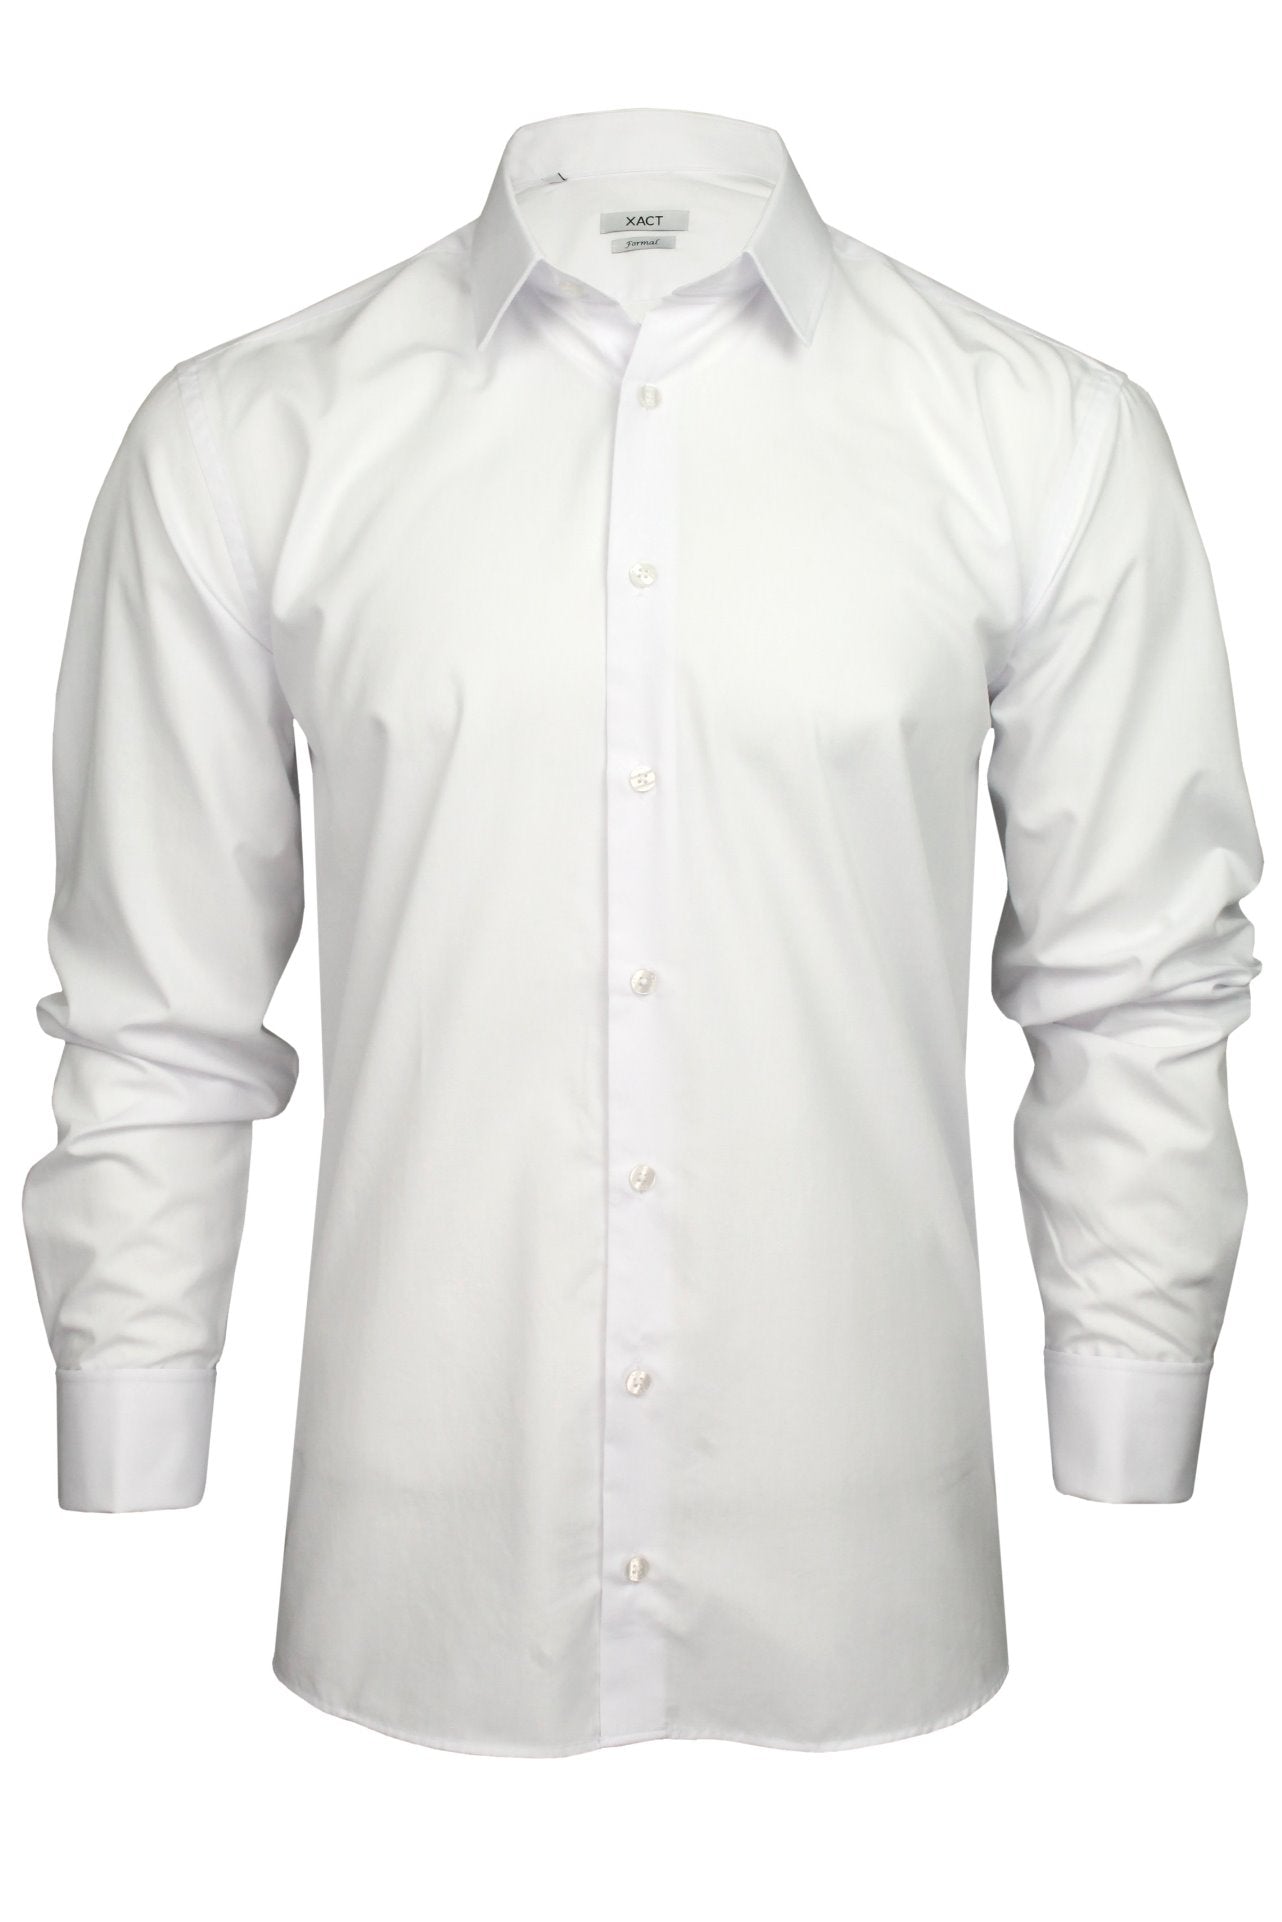 Xact Men's Plain Poplin Formal Shirt with Double/ French Cuff and Cuff Links-2